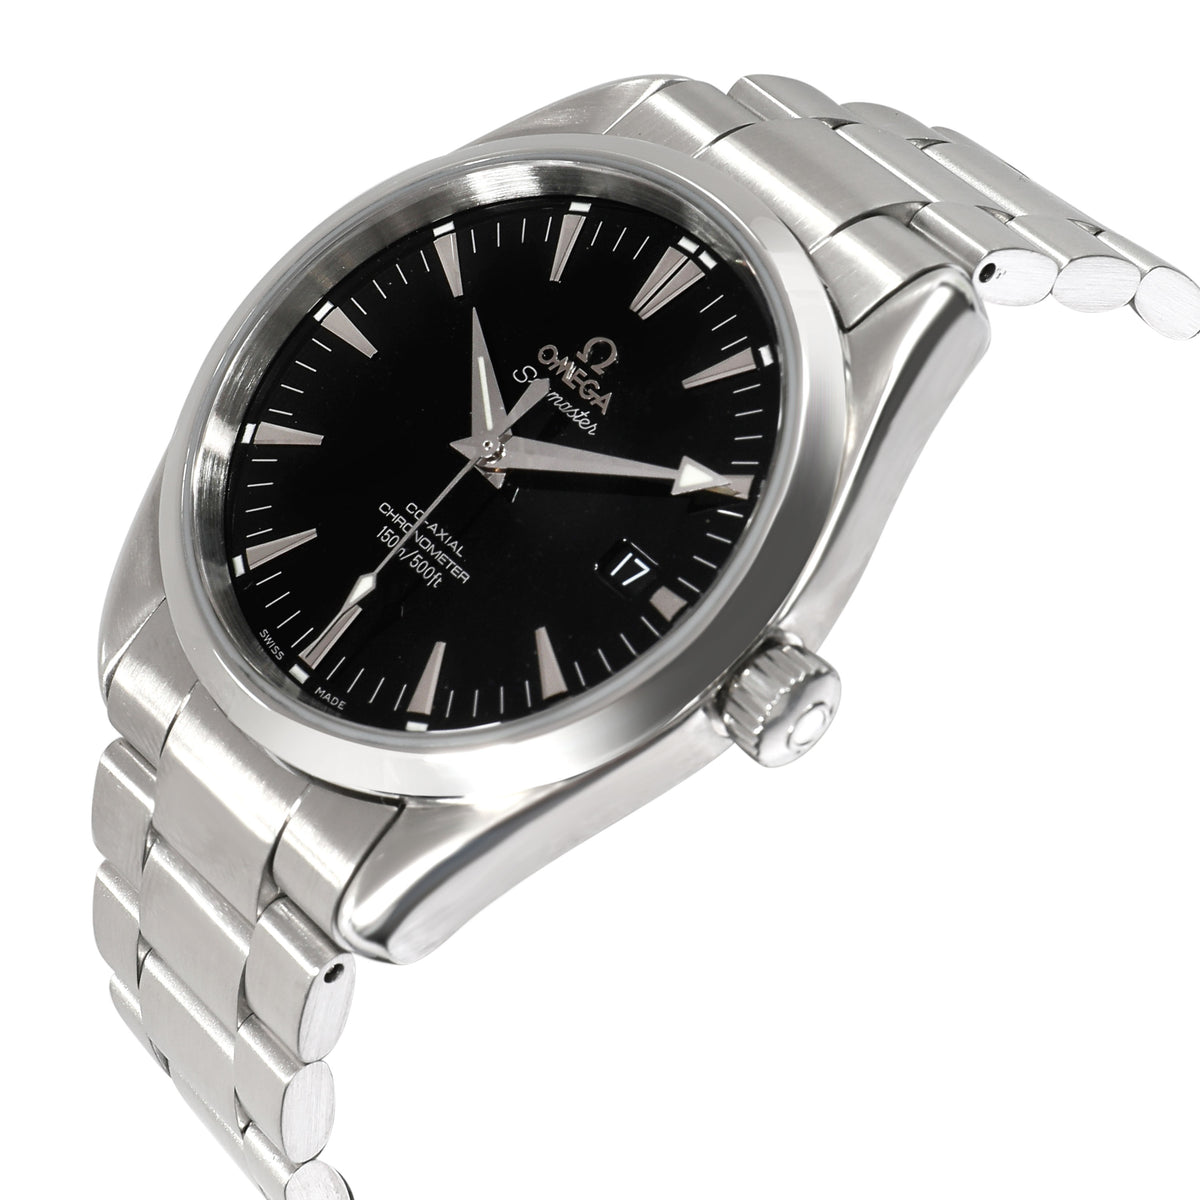 Omega Seamaster 2503.50 Men's Watch in  Stainless Steel